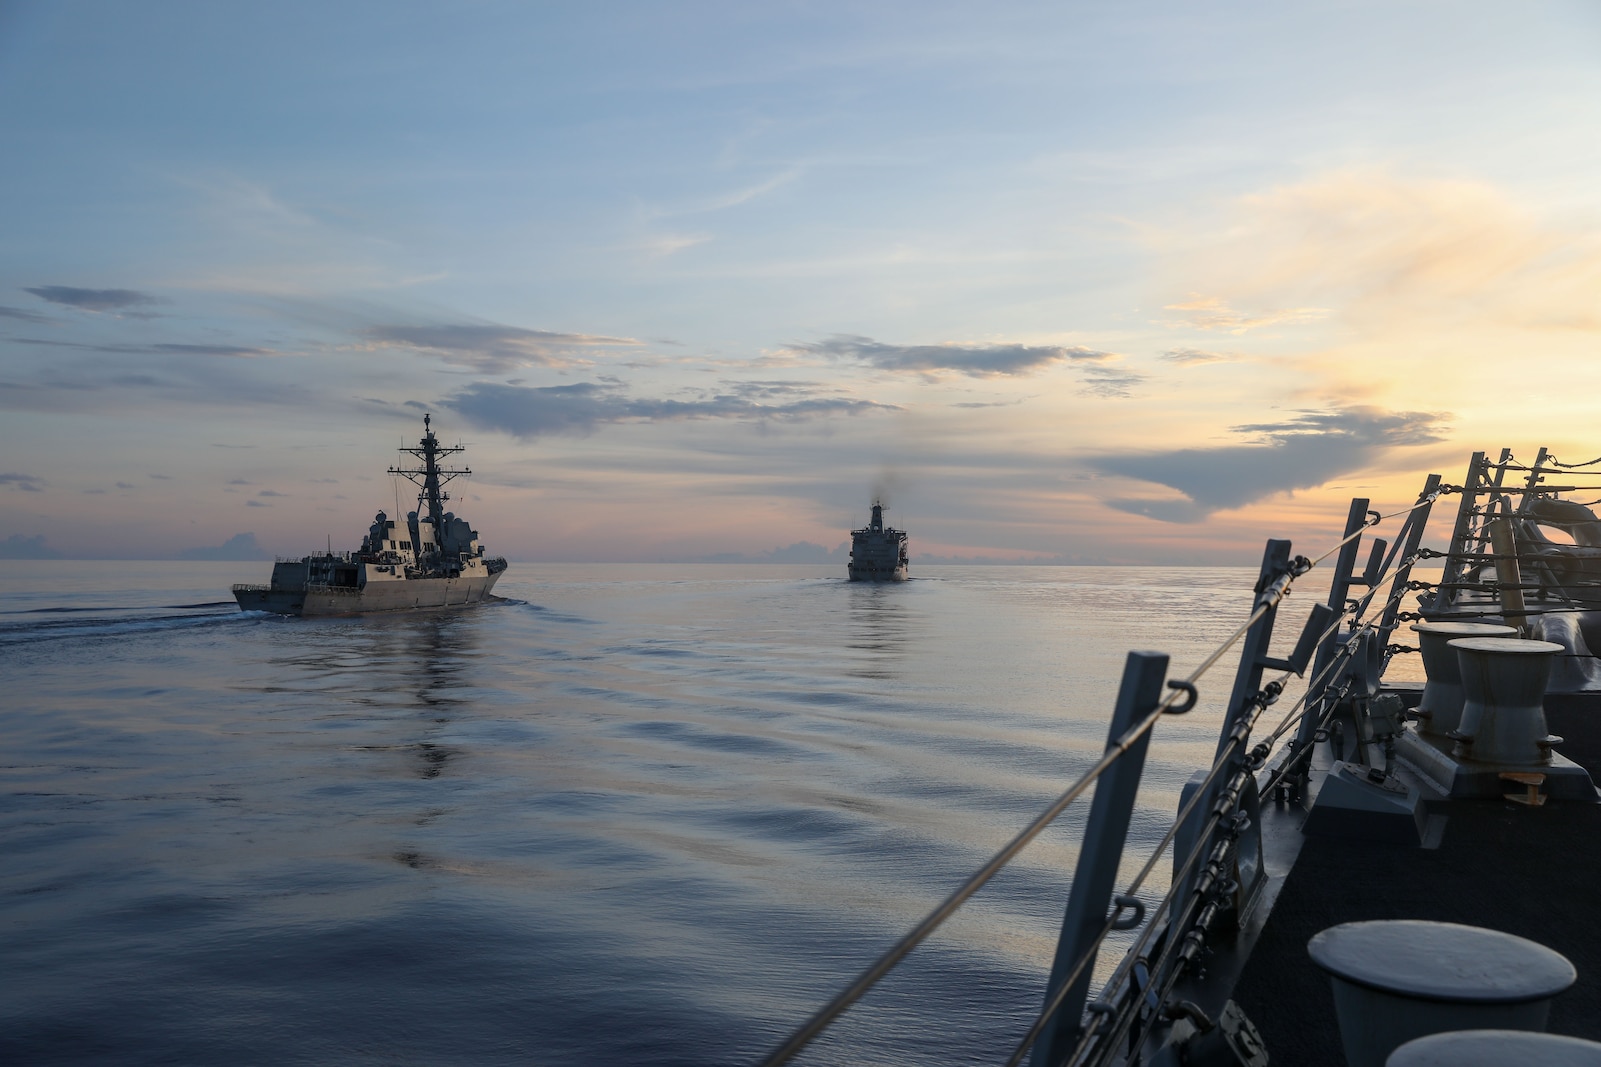 The Arleigh Burke-class guided-missile destroyer USS Howard (DDG 83) and the Arleigh Burke-class guided-missile destroyer Daniel Inouye (DDG 118) prepare to conduct a replenishment-at-sea with the Henry J. Kaiser-Class Underway Replenishment Oiler USNS John Ericsson (T-AO 194) in the South China Sea